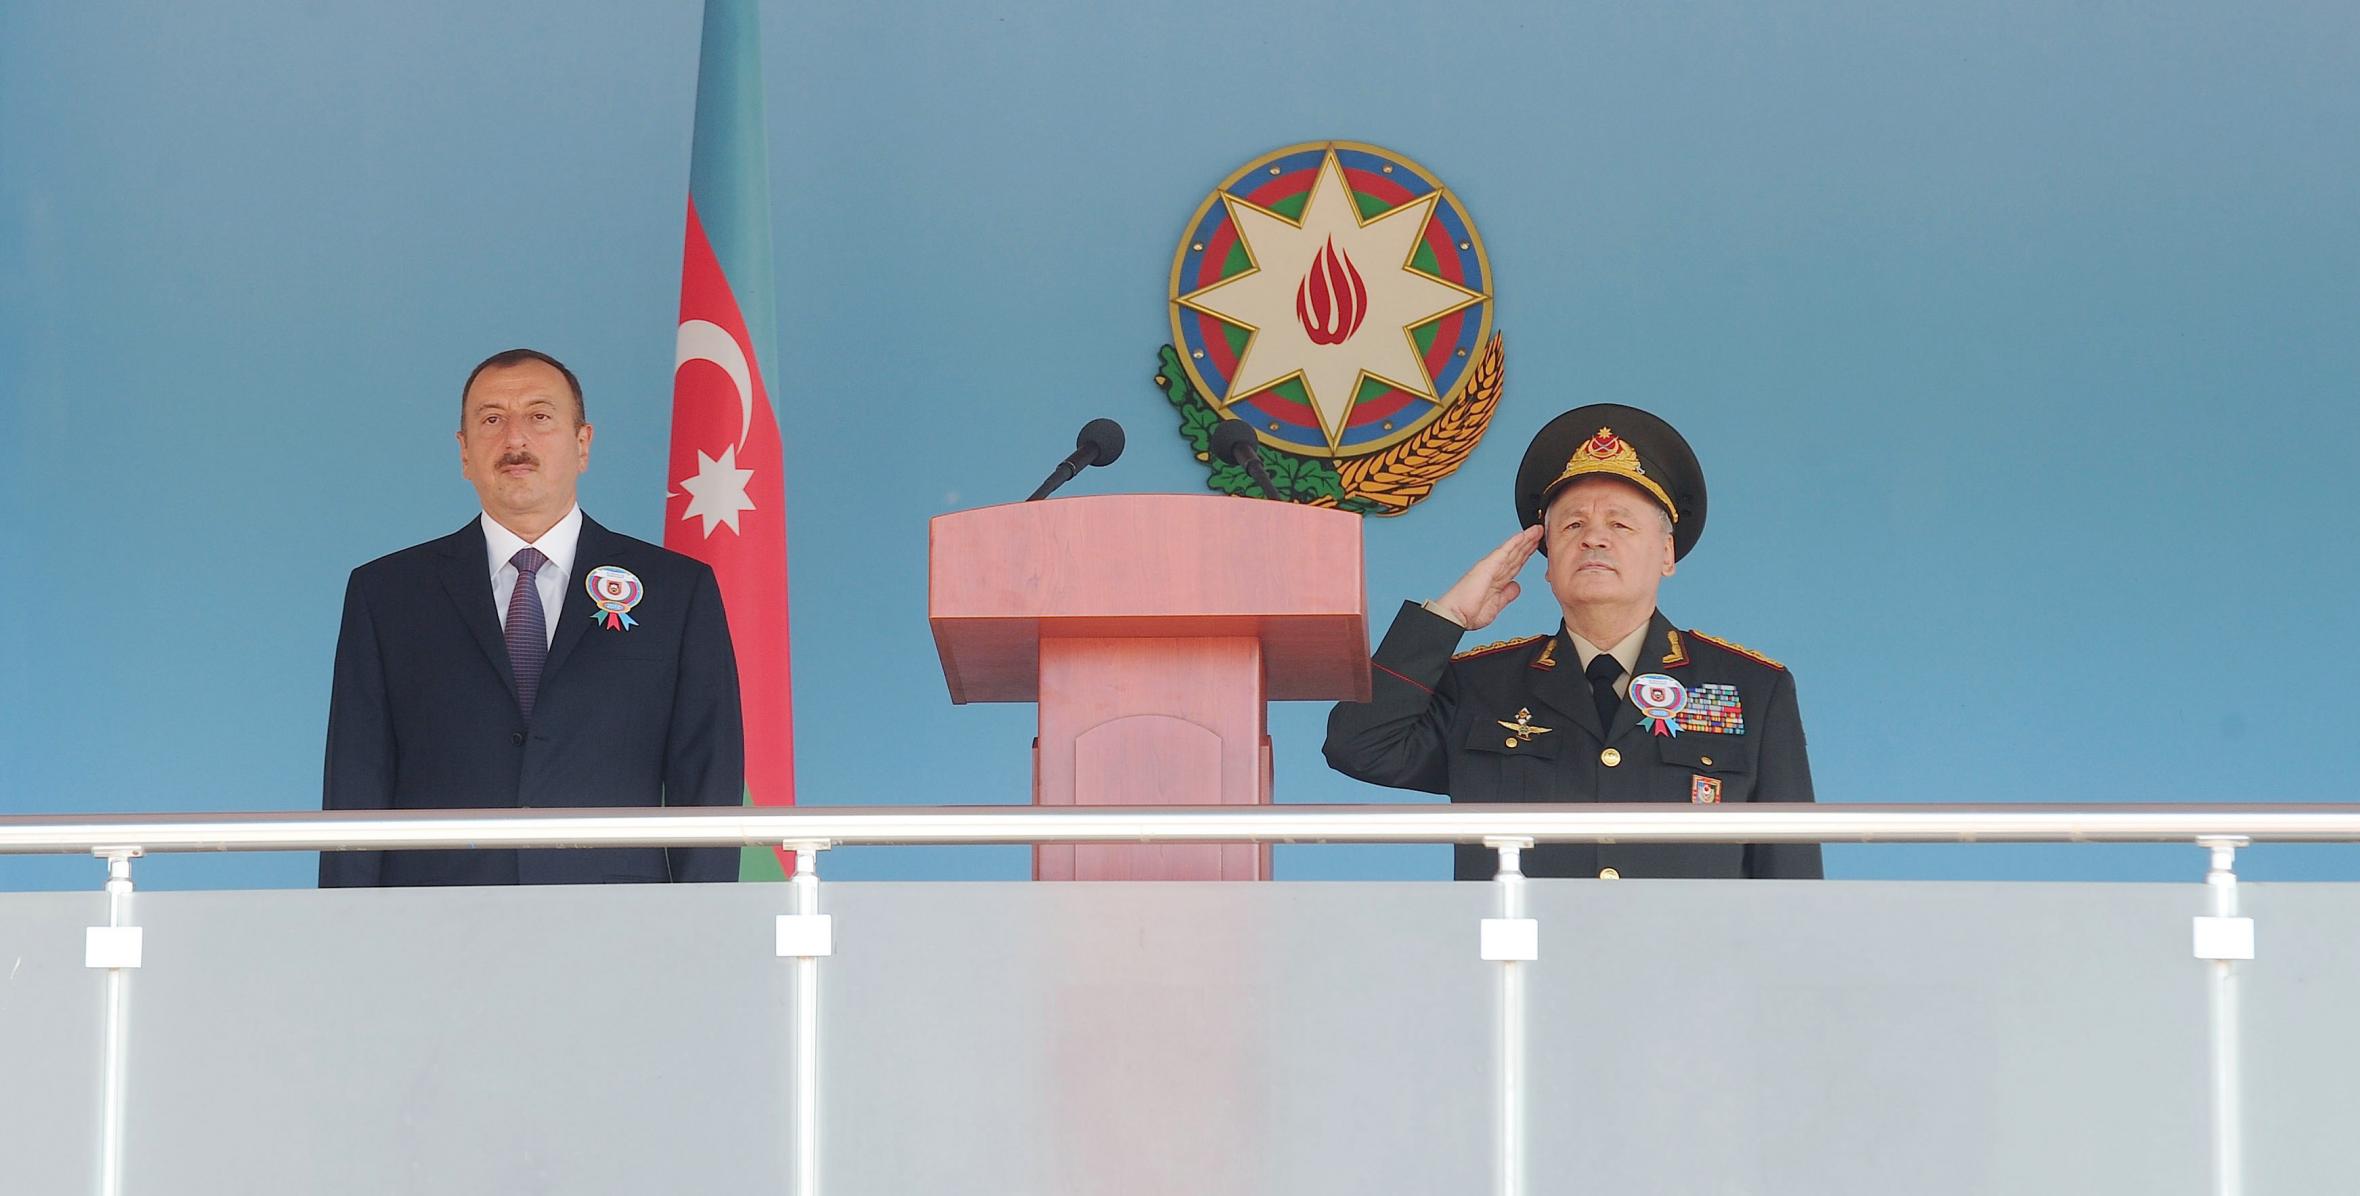 Ilham Aliyev attended a ceremony at the Top Level Military School named after Heydar Aliyev dedicated to the 2012 graduation of special purpose military educational institutions